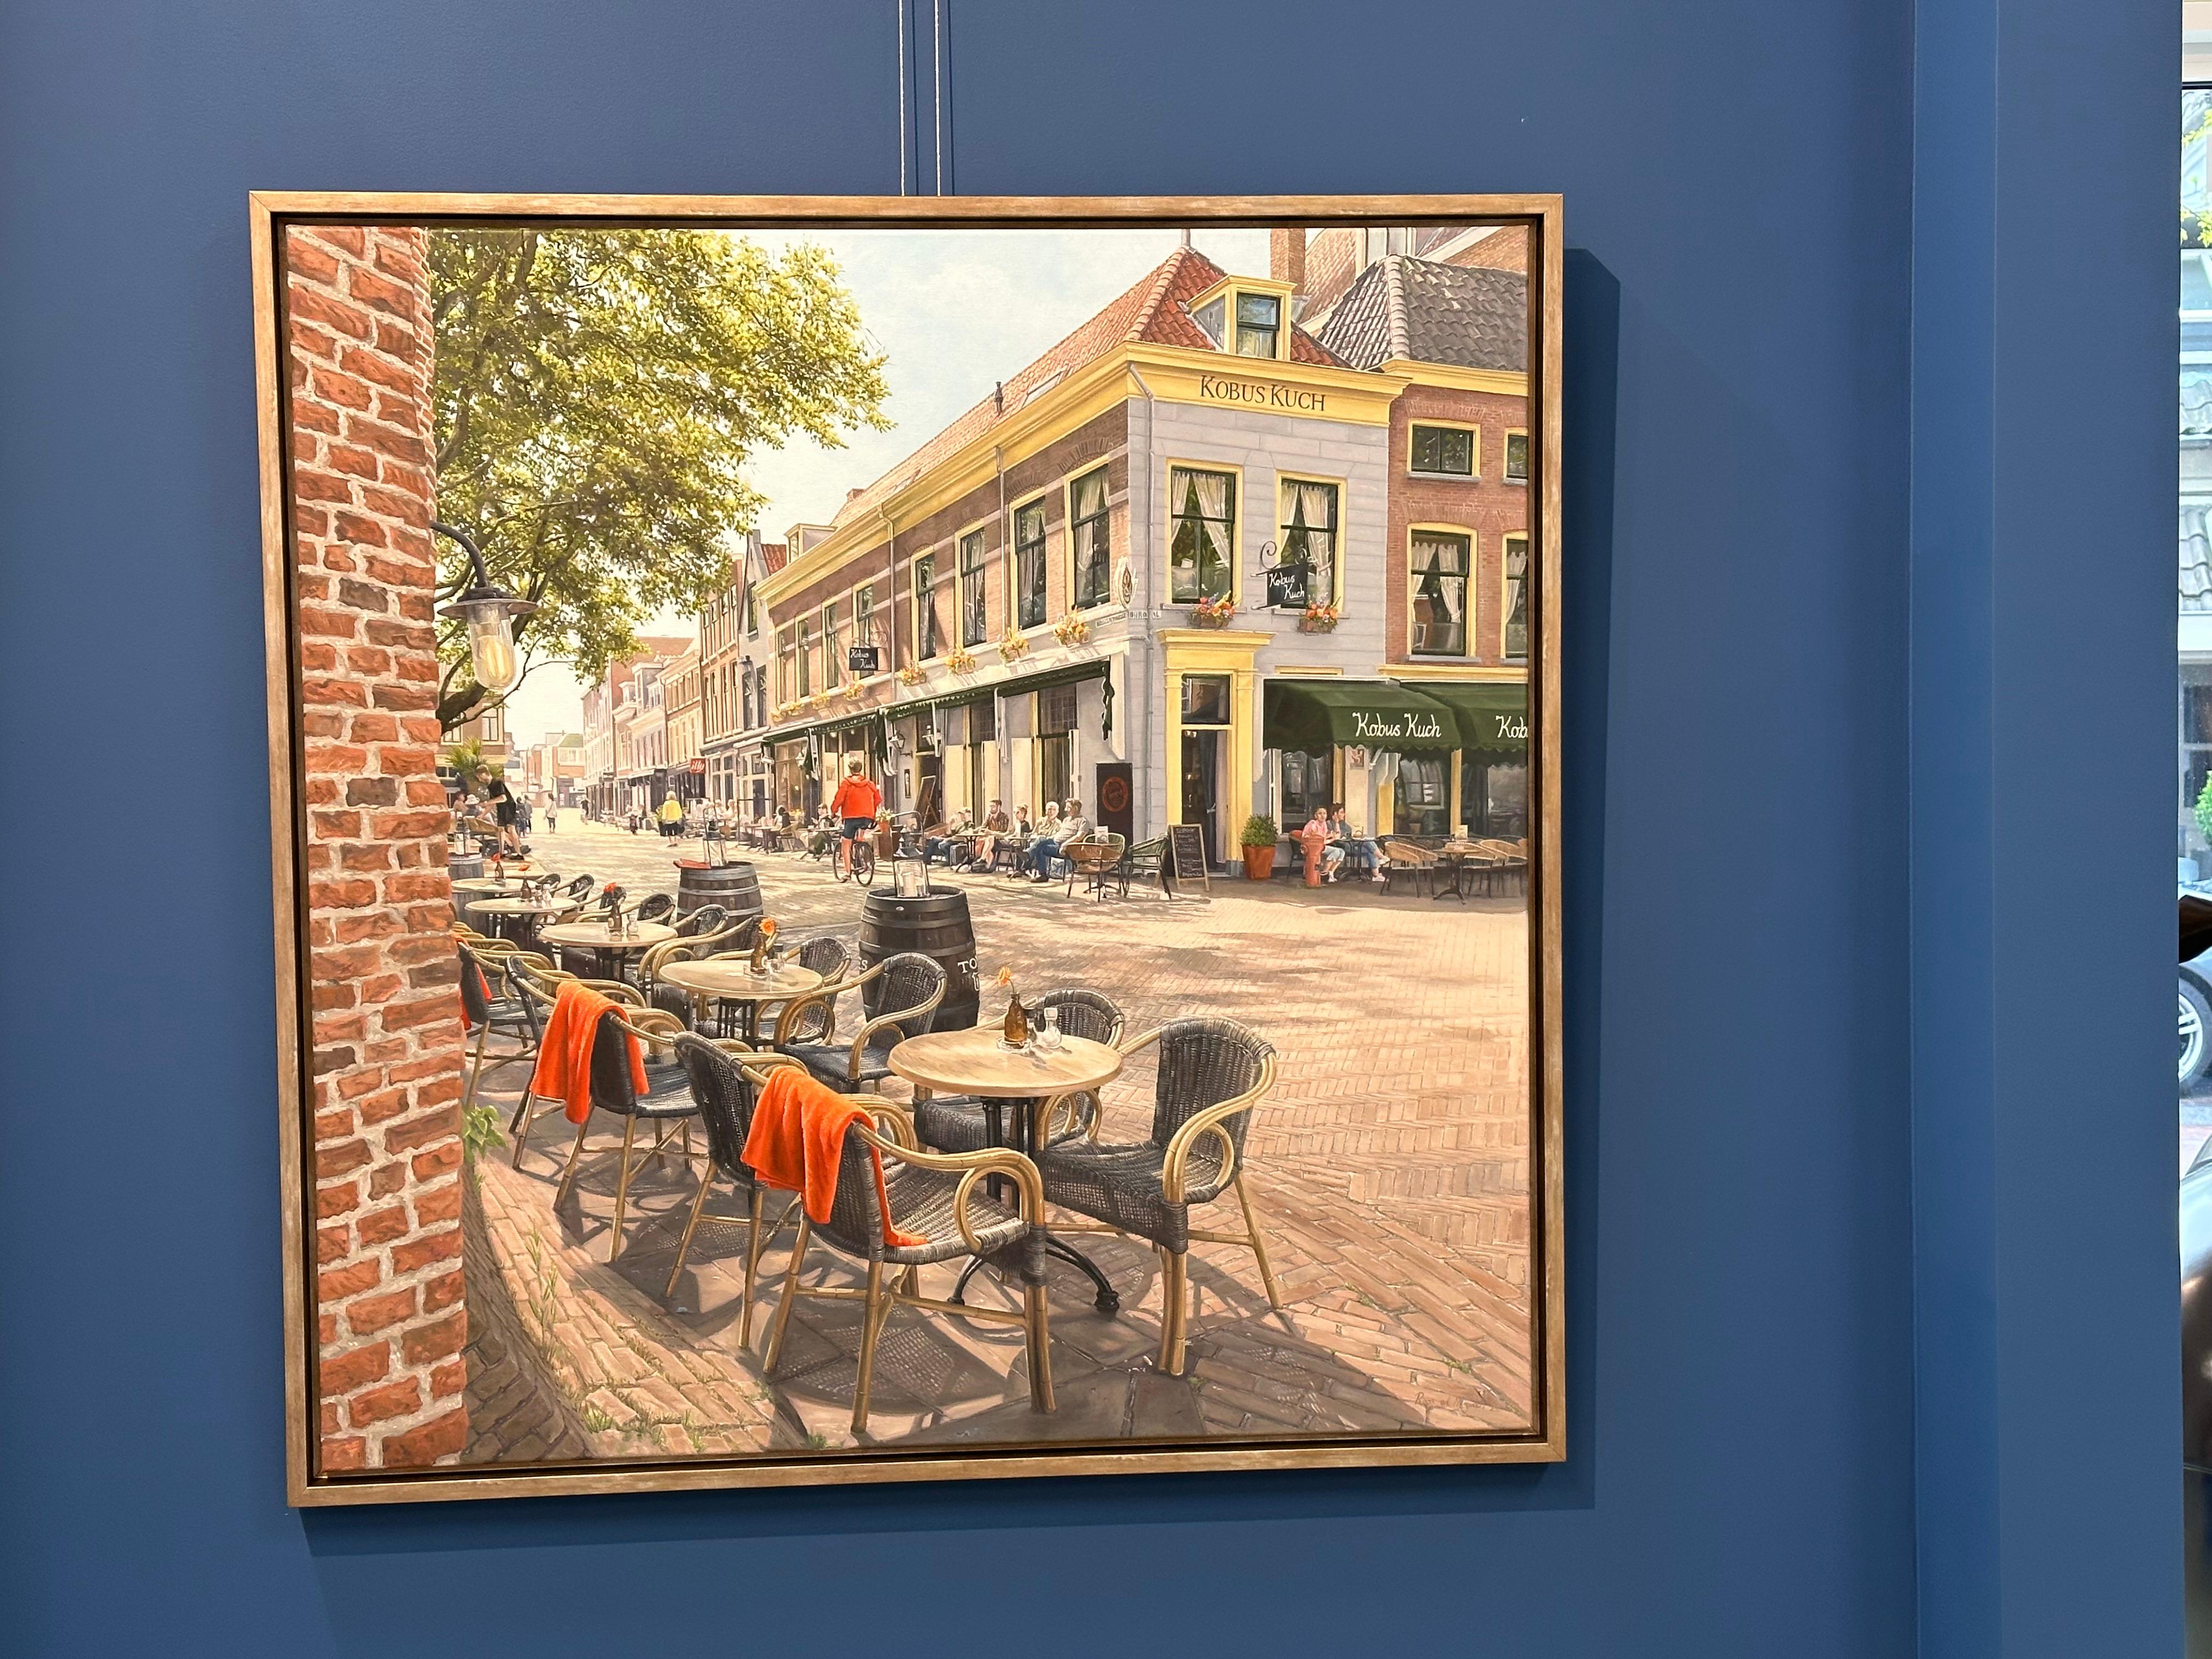 Kobus Kuch, Delft - 21st Century Hyper Realistic oil painting of a Dutch City 2